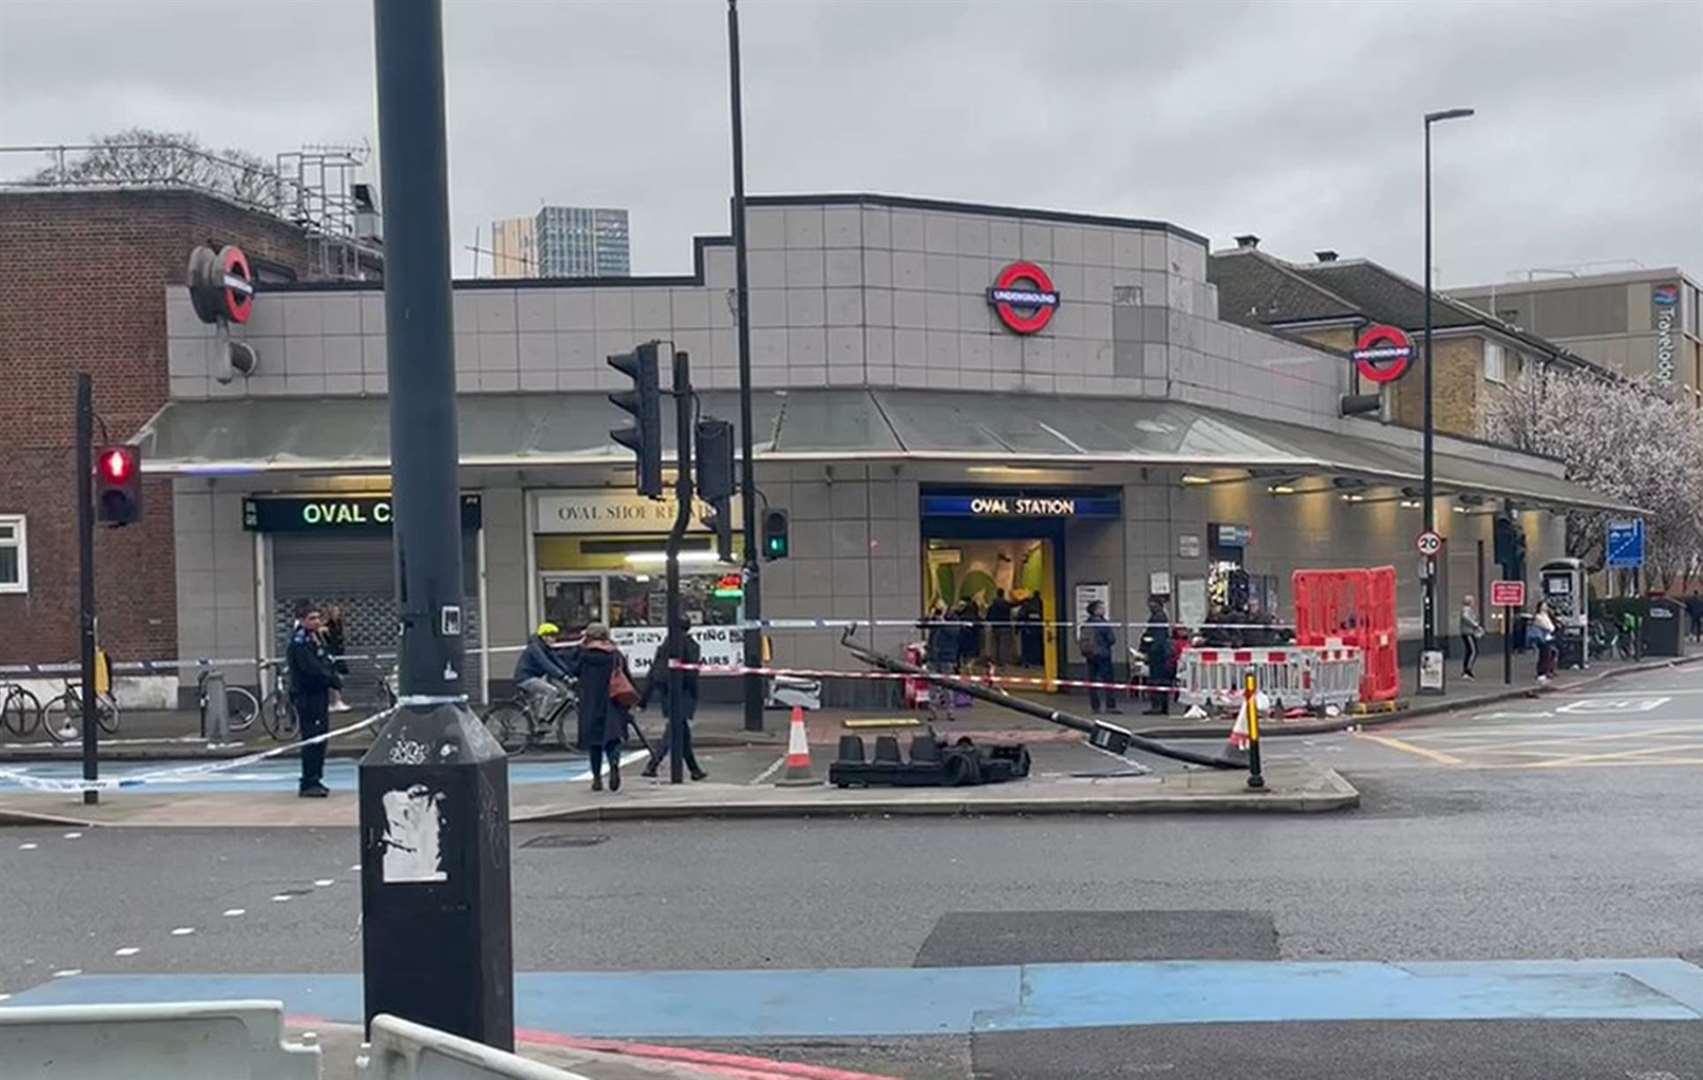 The scene on Kennington Park Road, near Oval Tube station (George Lithgow/PA)